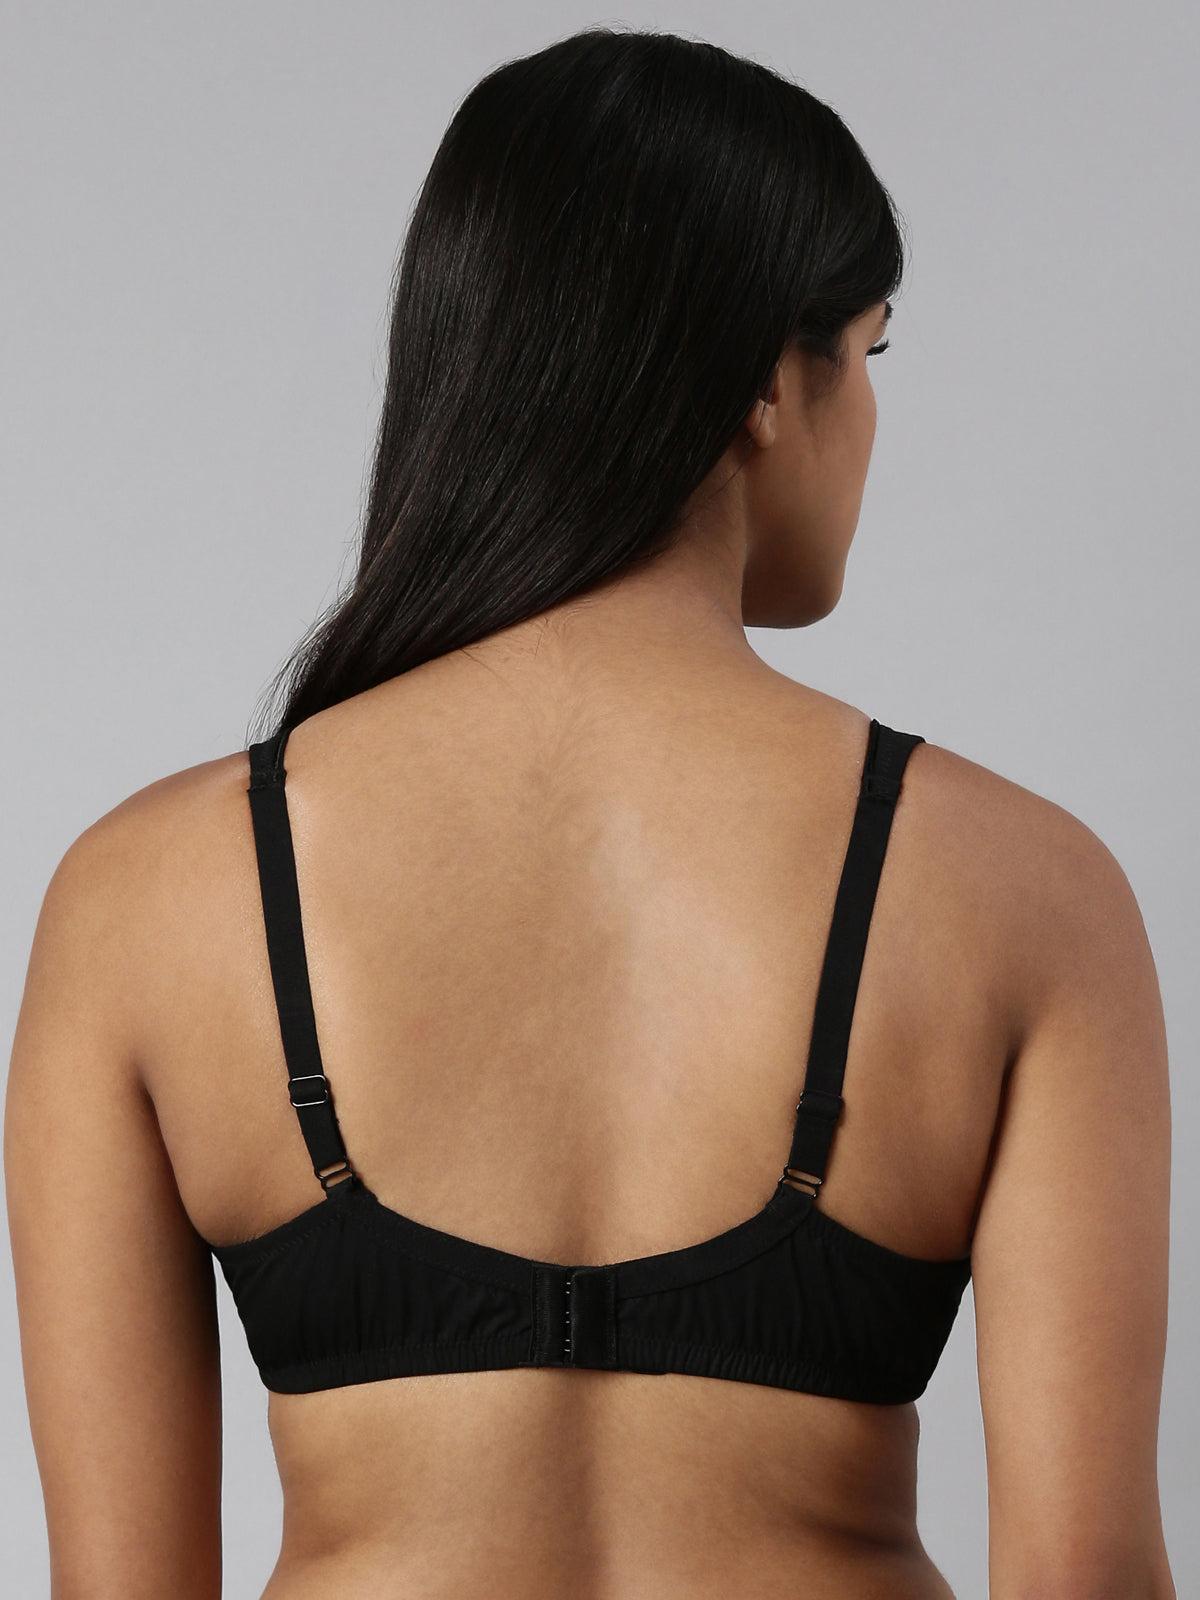 blossom-circlet-black4-woven knitted-support bra